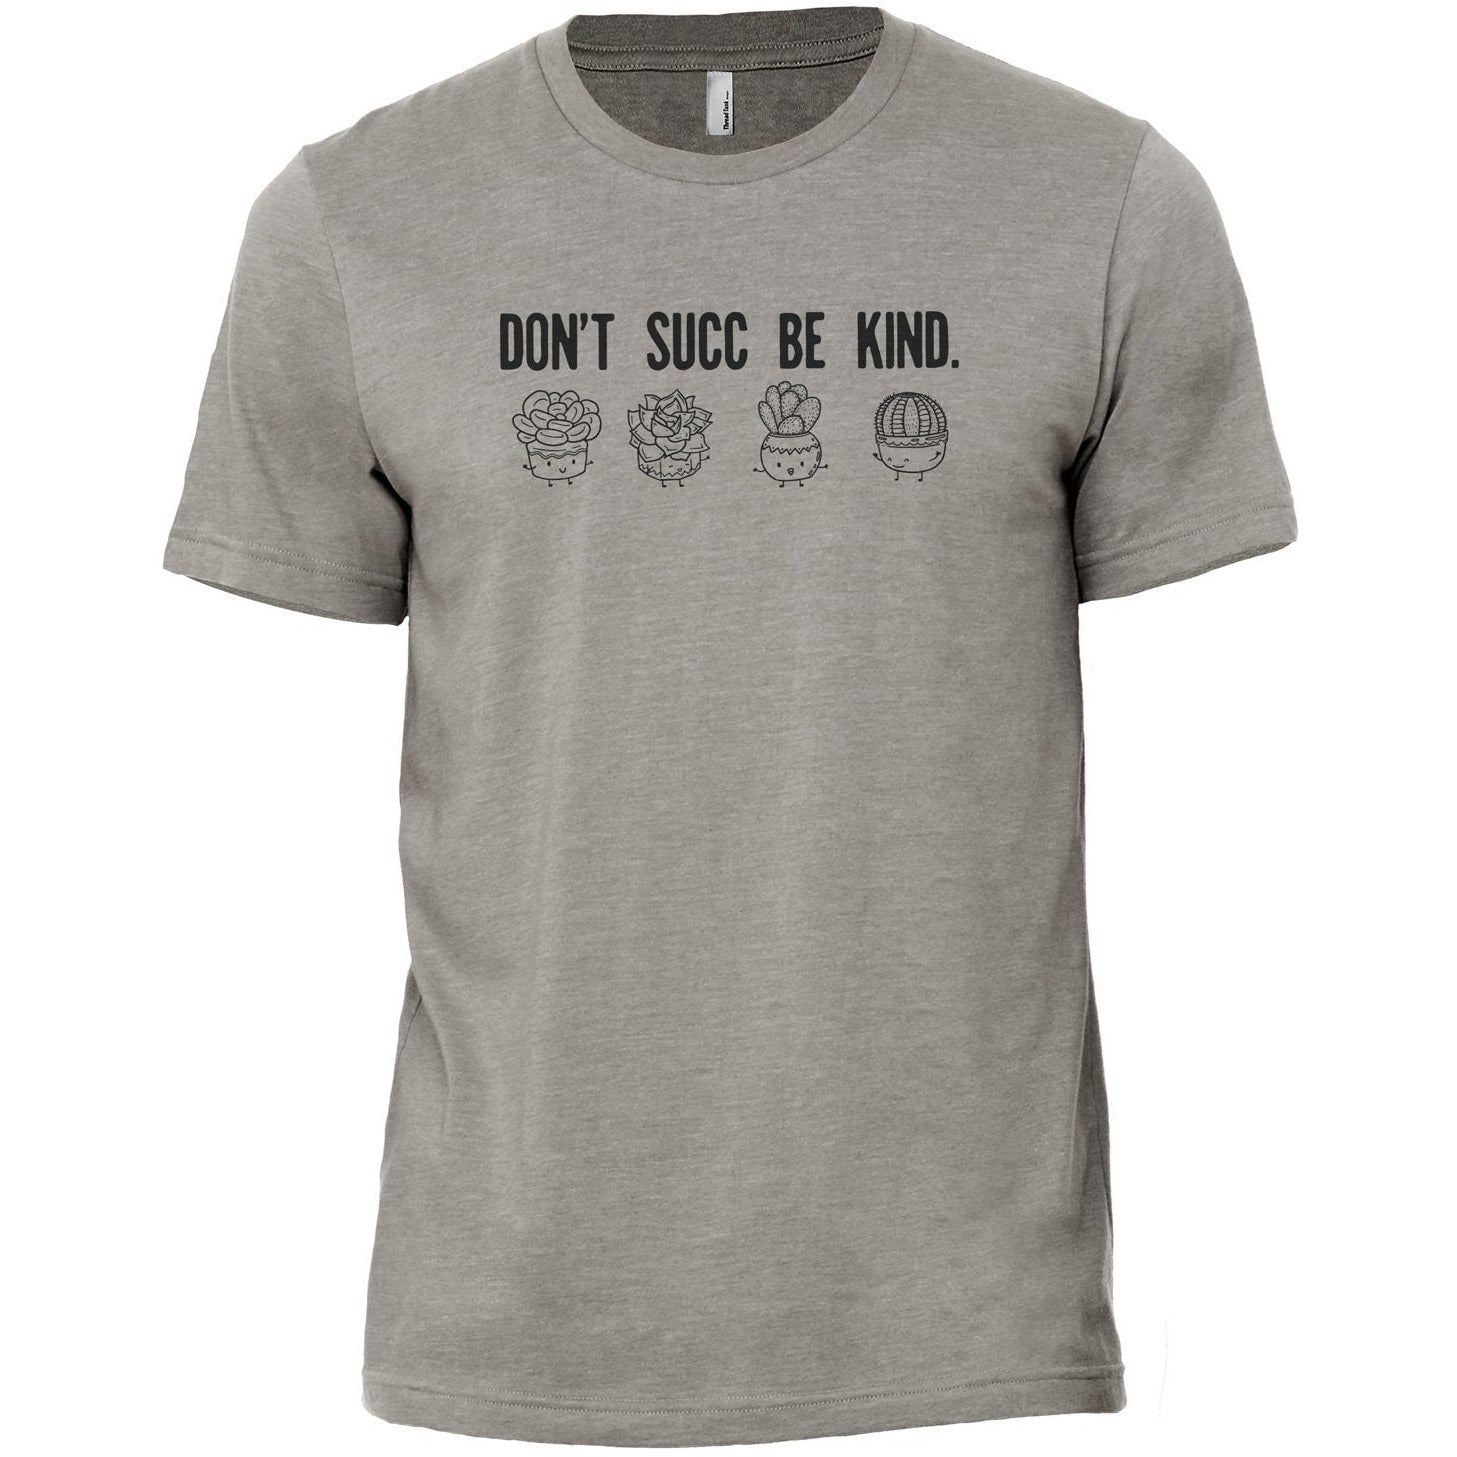 Don't Succ Be Kind Military Grey Printed Graphic Crew T-Shirt Tee